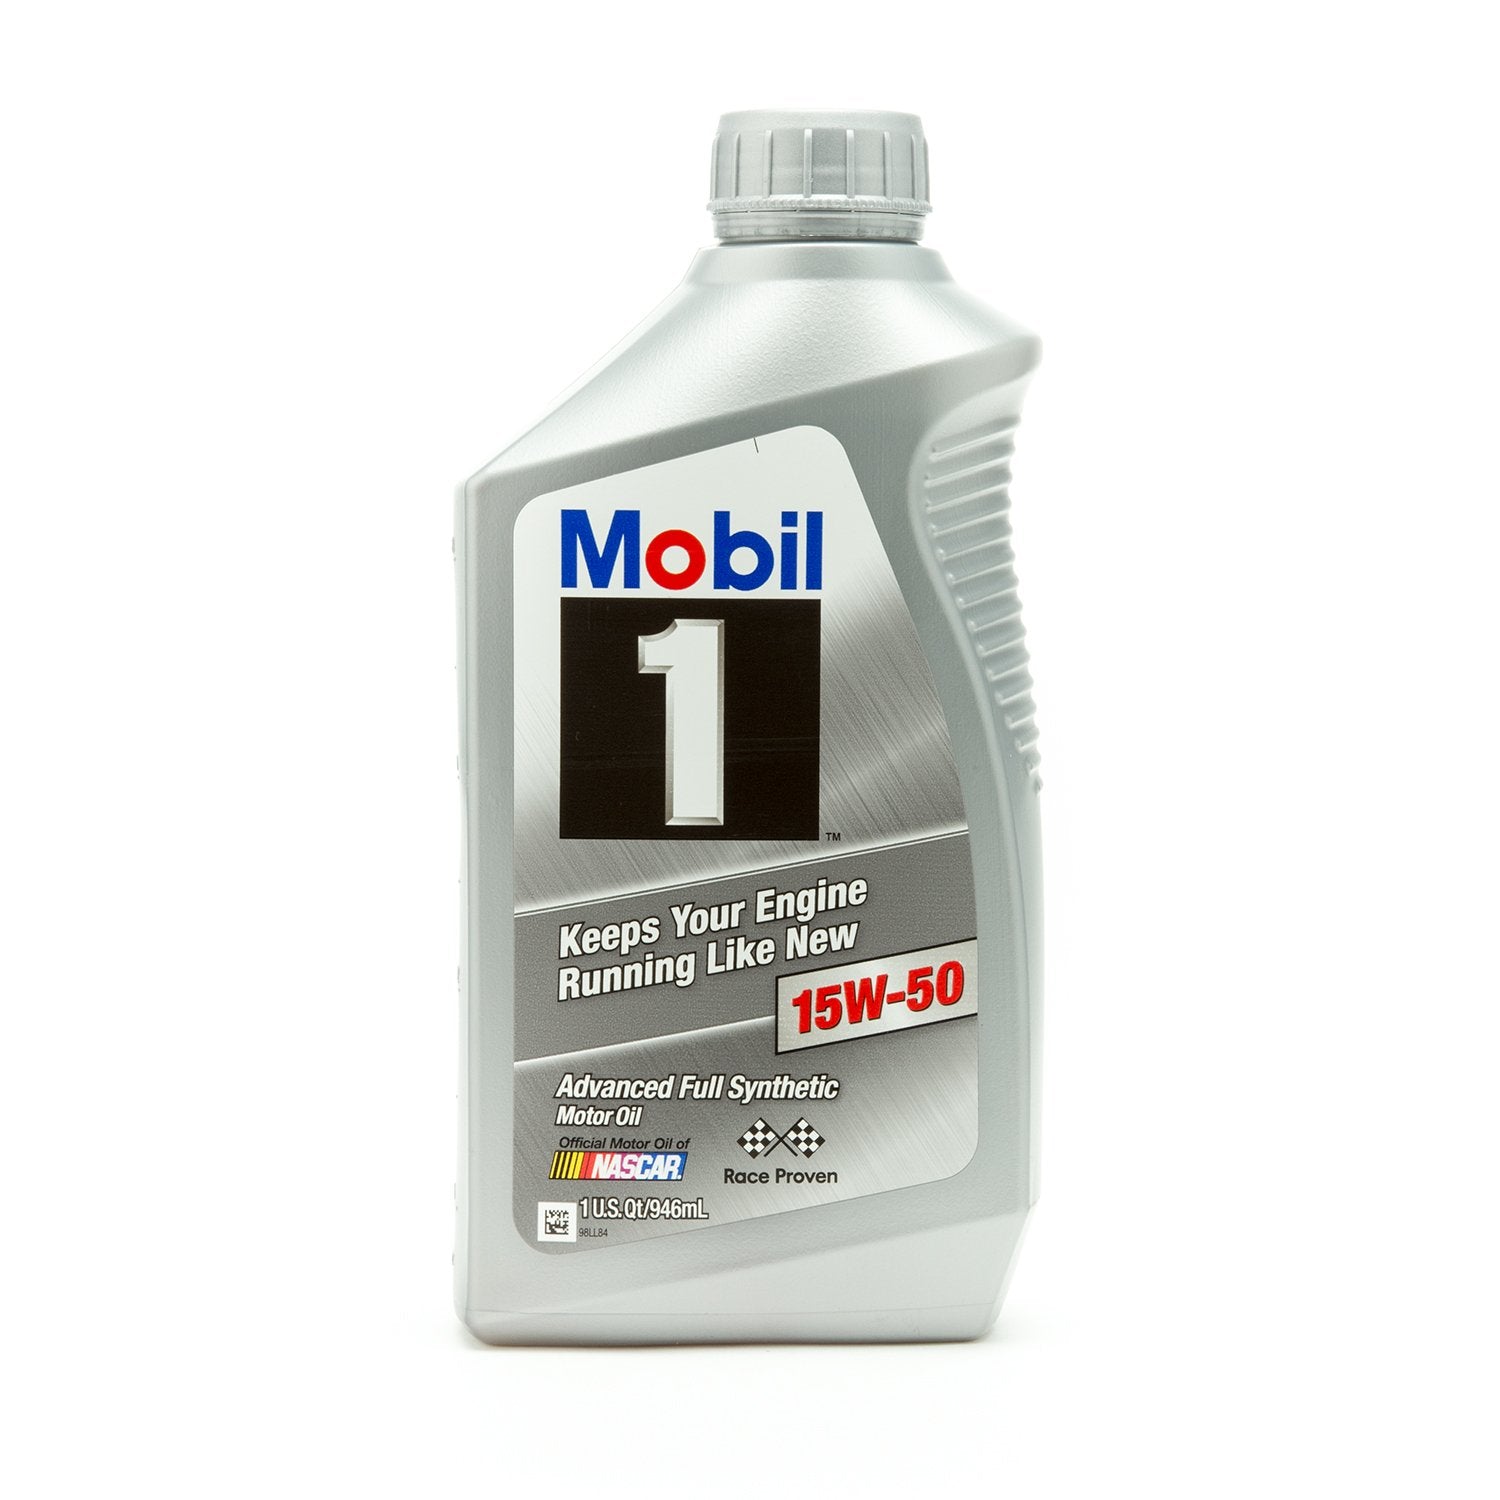 Mobil 1 Supersyn Fully Synthetic Motor Oil, 15W-50, quart (201)